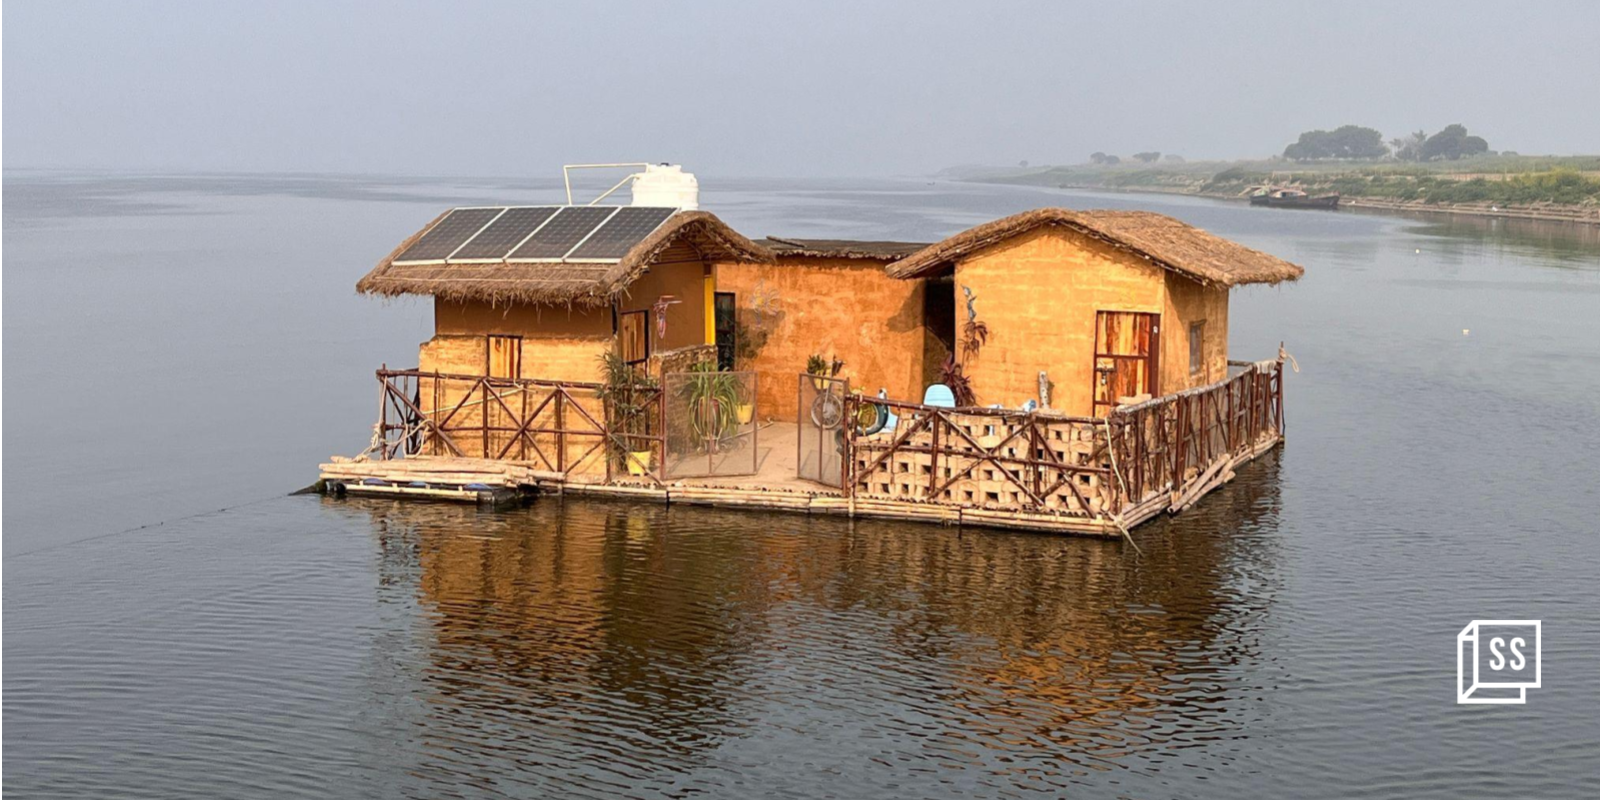 Floating House Project: How this engineer’s creation can combat floods in Bihar